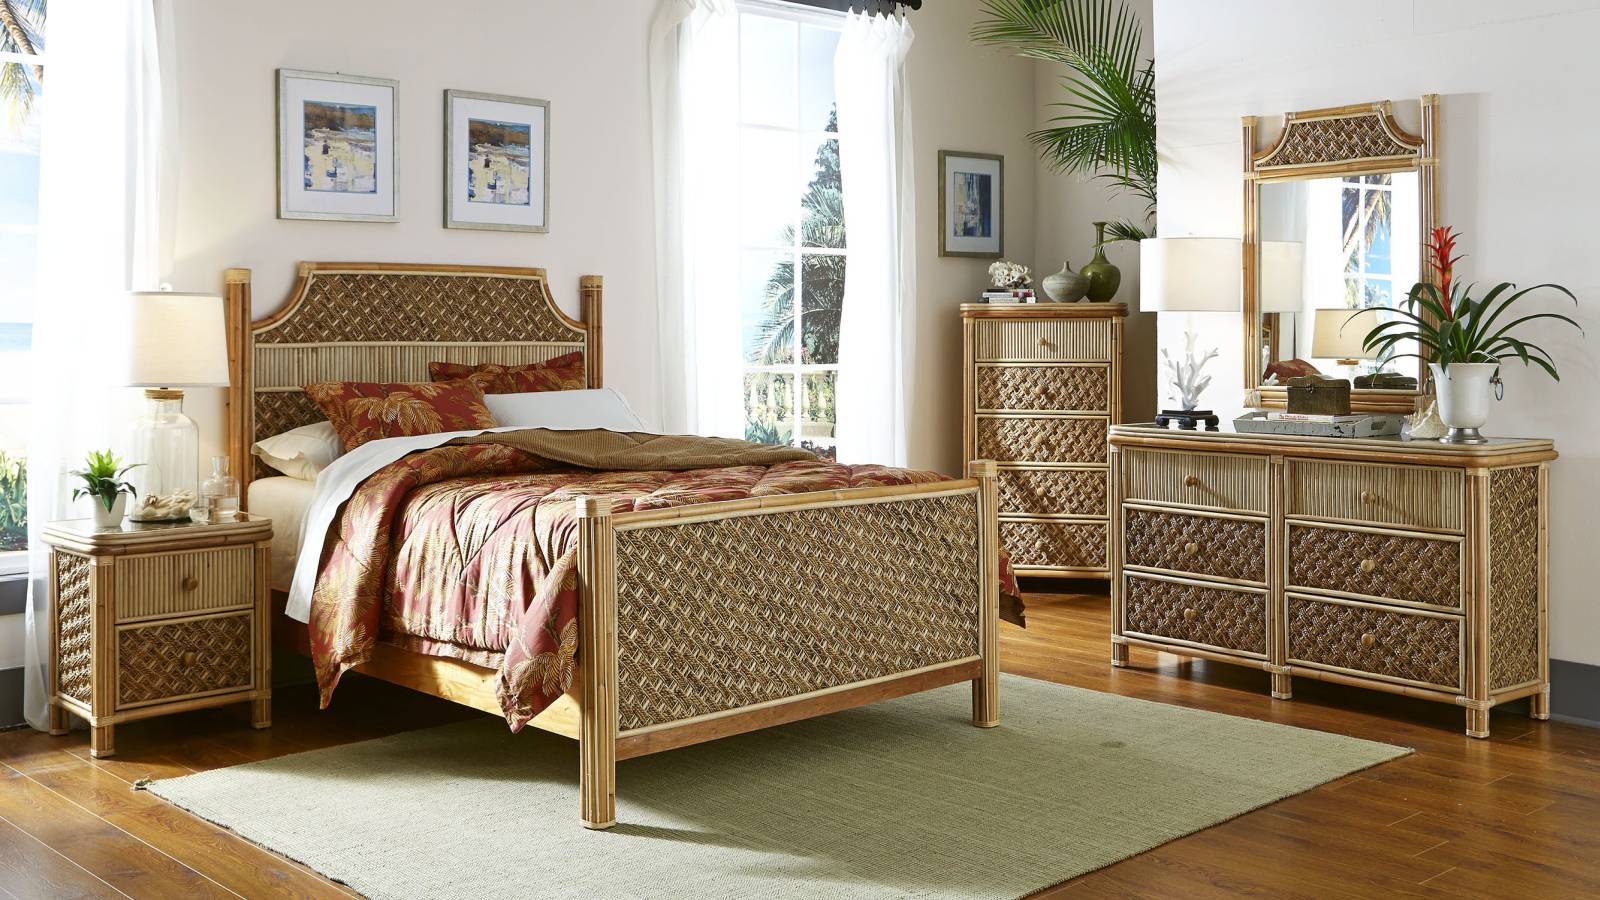 An environmentally friendly and healthy bedroom set